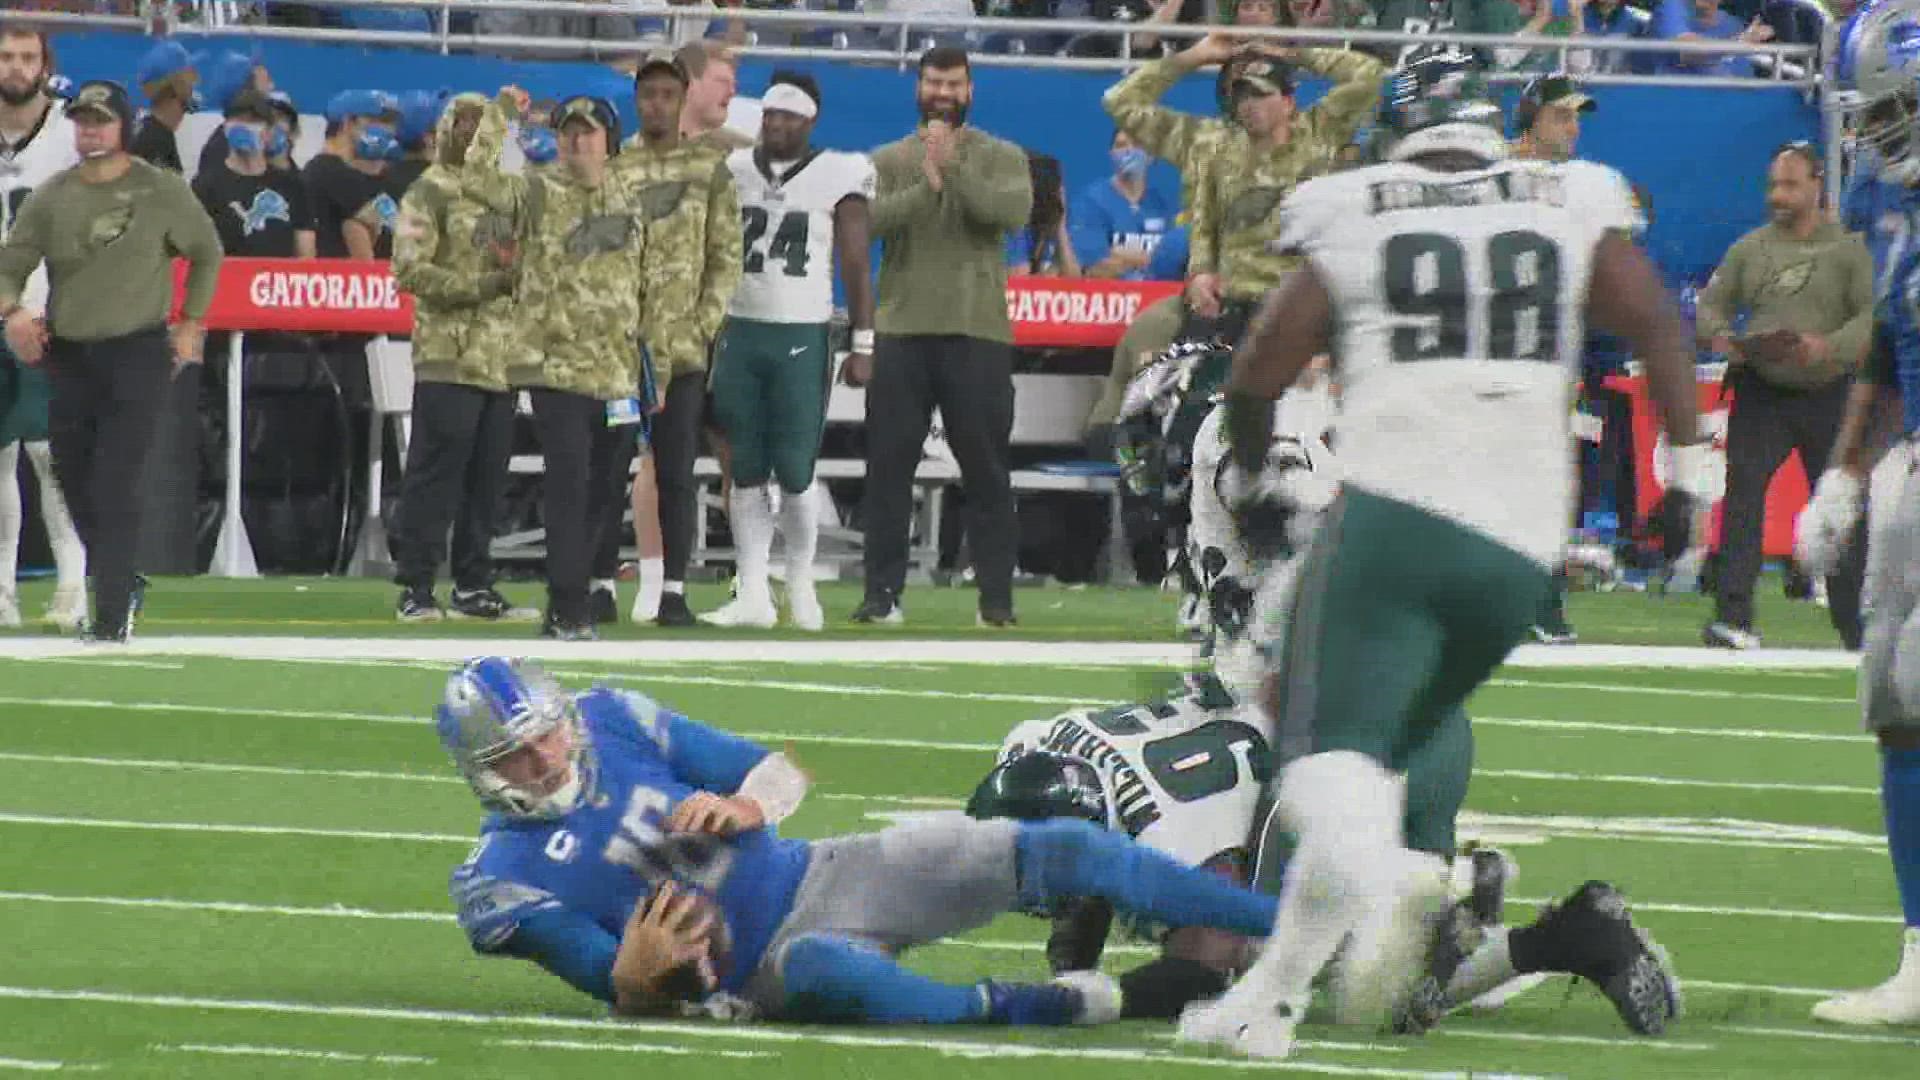 For the second time in three weeks, the Lions put forth an awful effort and it resulted in a 44 to 6 drubbing at the hands of the Eagles.